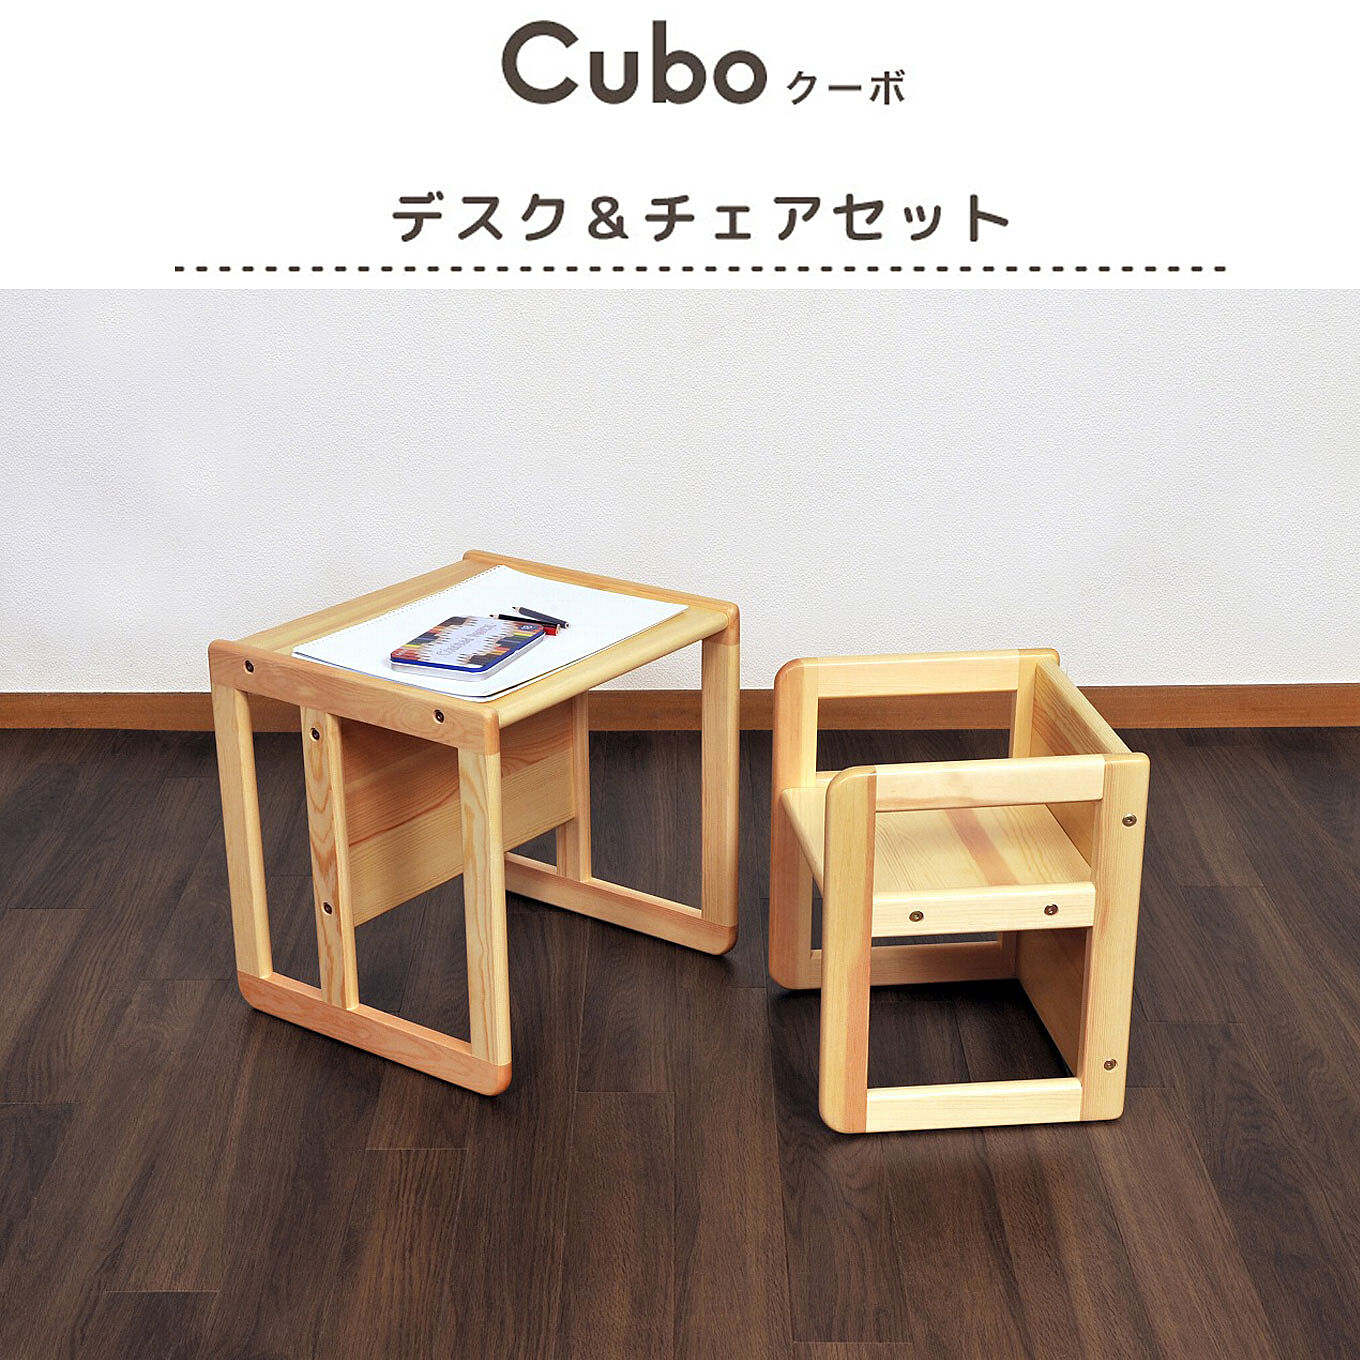 「Cubo（クーボ）デスク＆チェア」モニター3名様大募集！